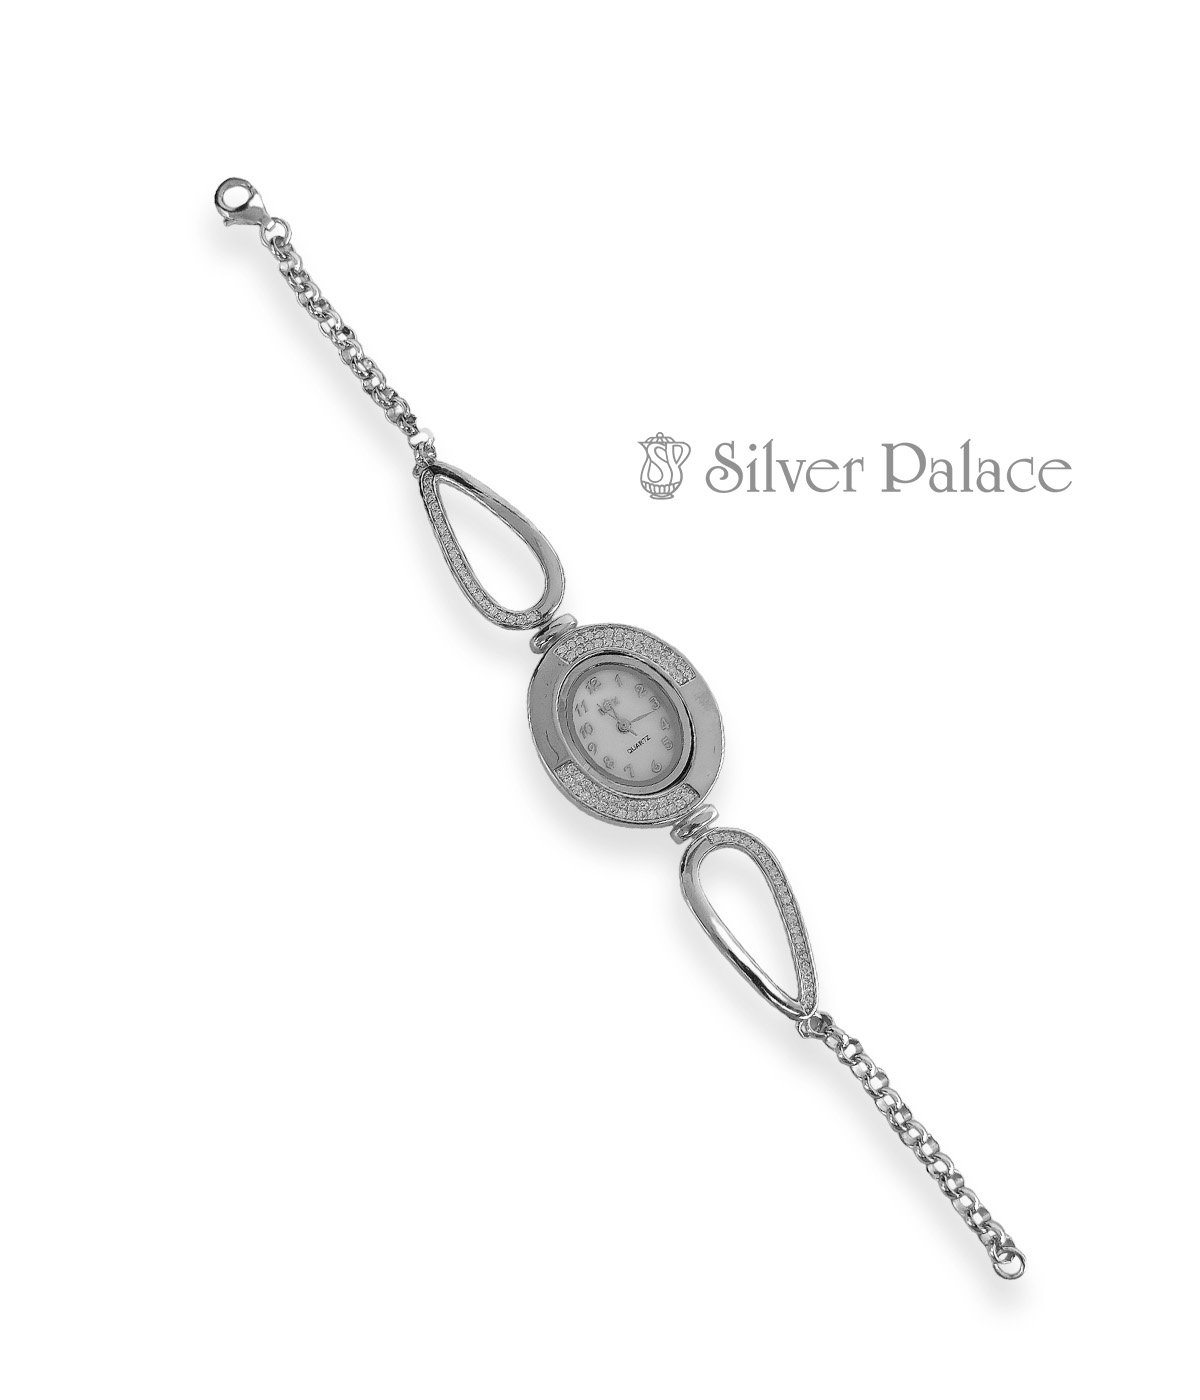 92.5 STERLING SILVER HOLLOW ADJUSTABLE STRAP WATCH